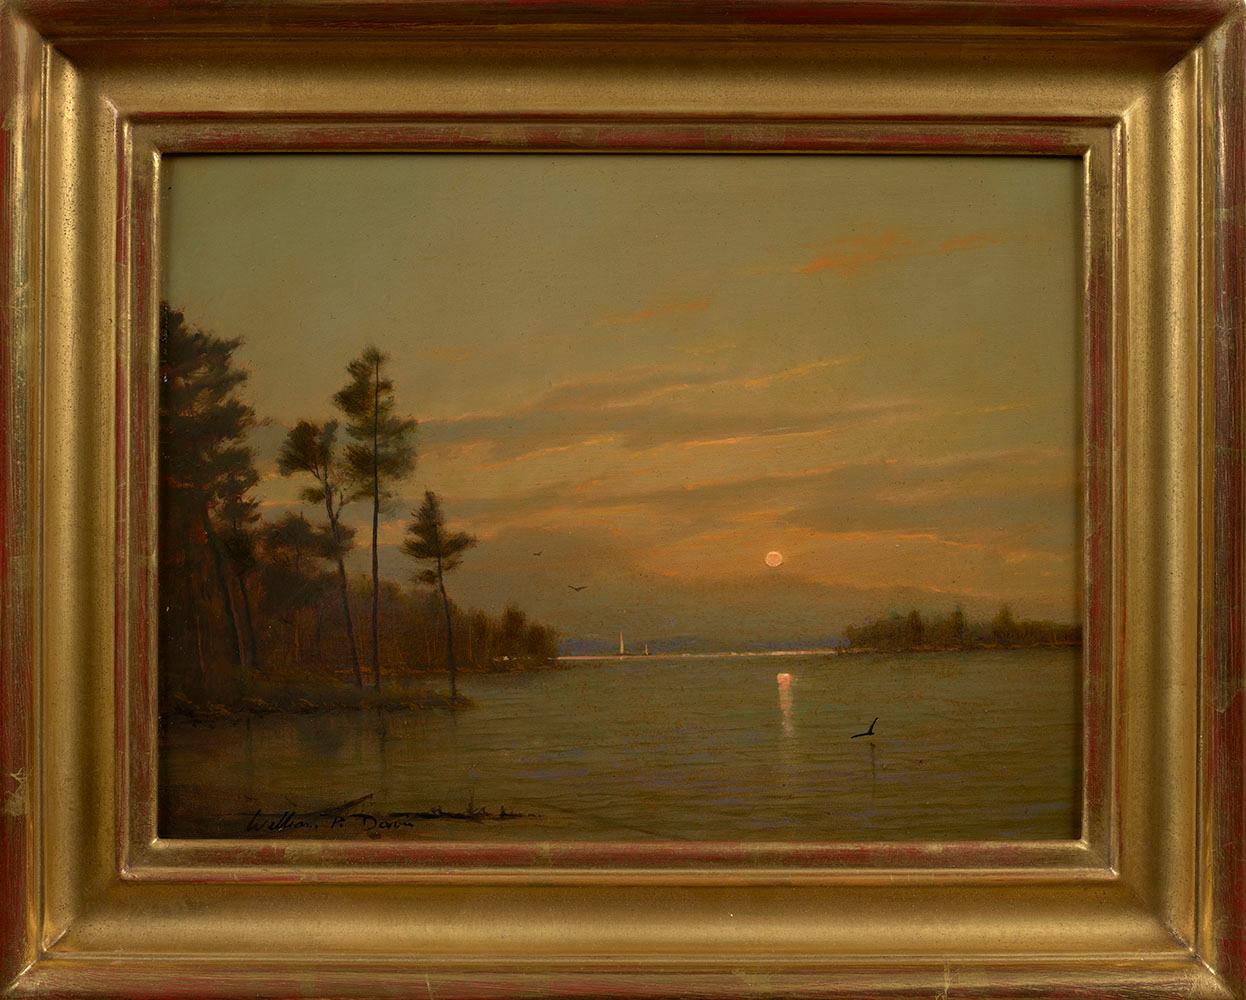 Inlet Sunset, 2019 - Painting by William Davis, Jr.